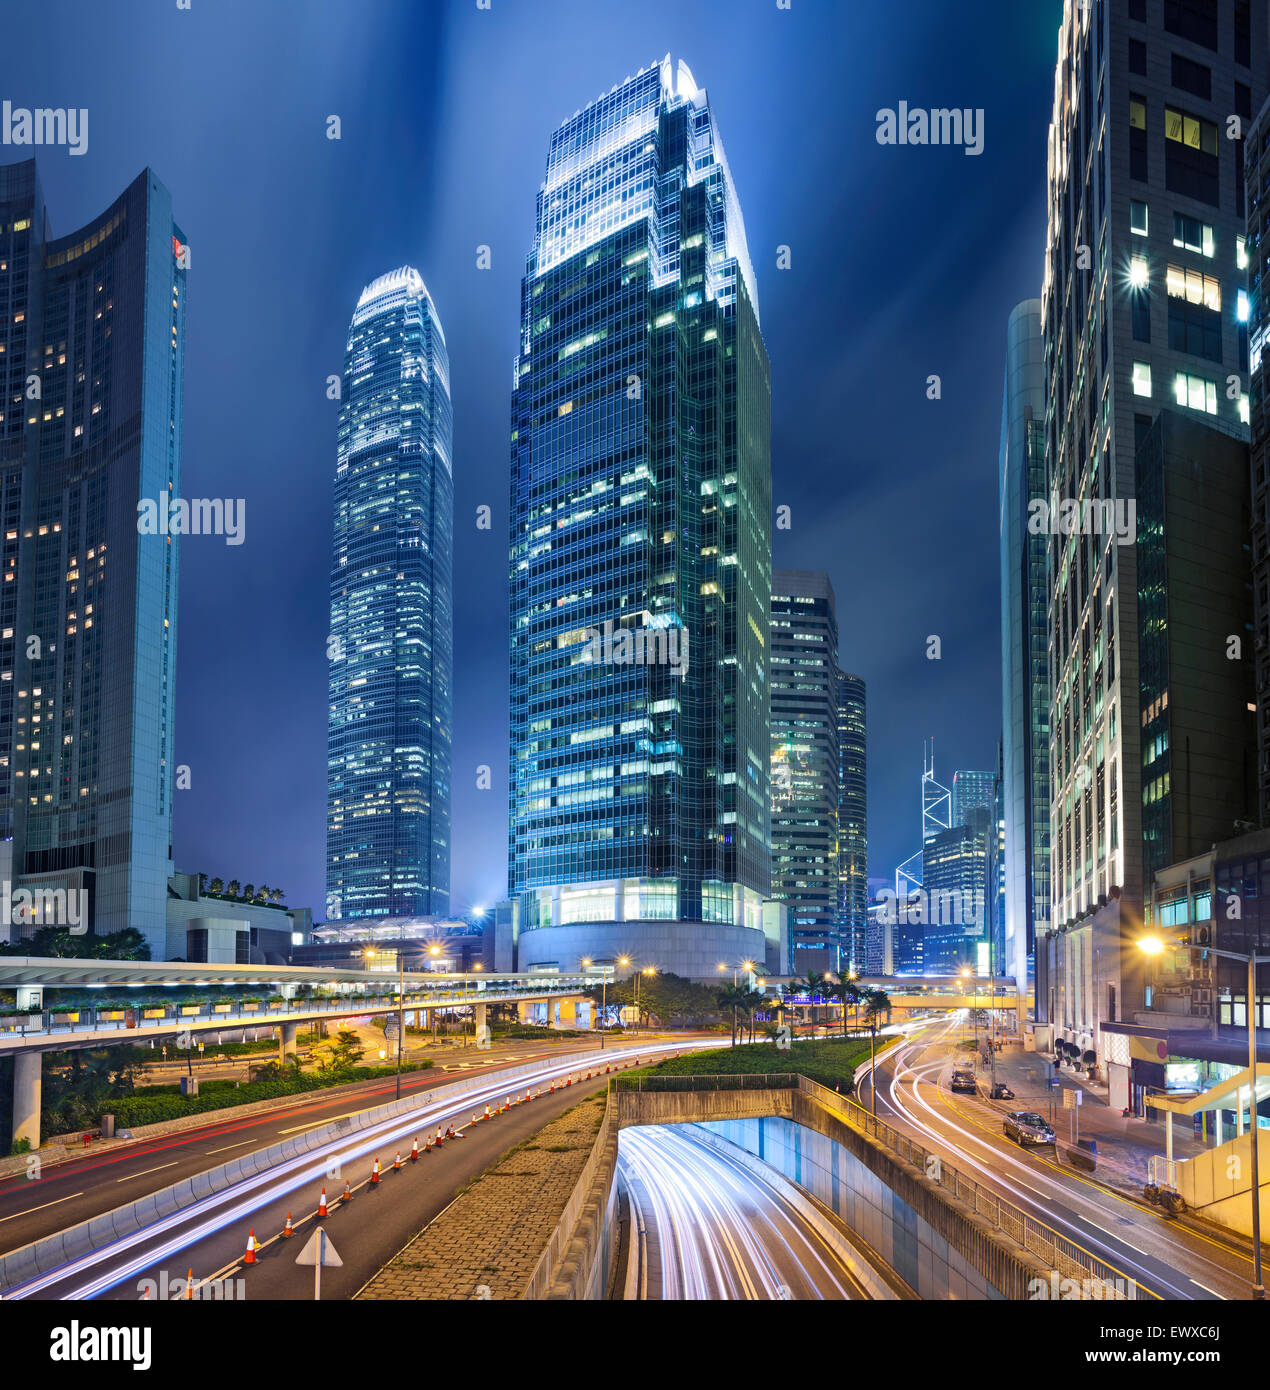 Image of downtown Hong Kong at night. This is composite of three vertical images stitched together in photoshop. Stock Photo